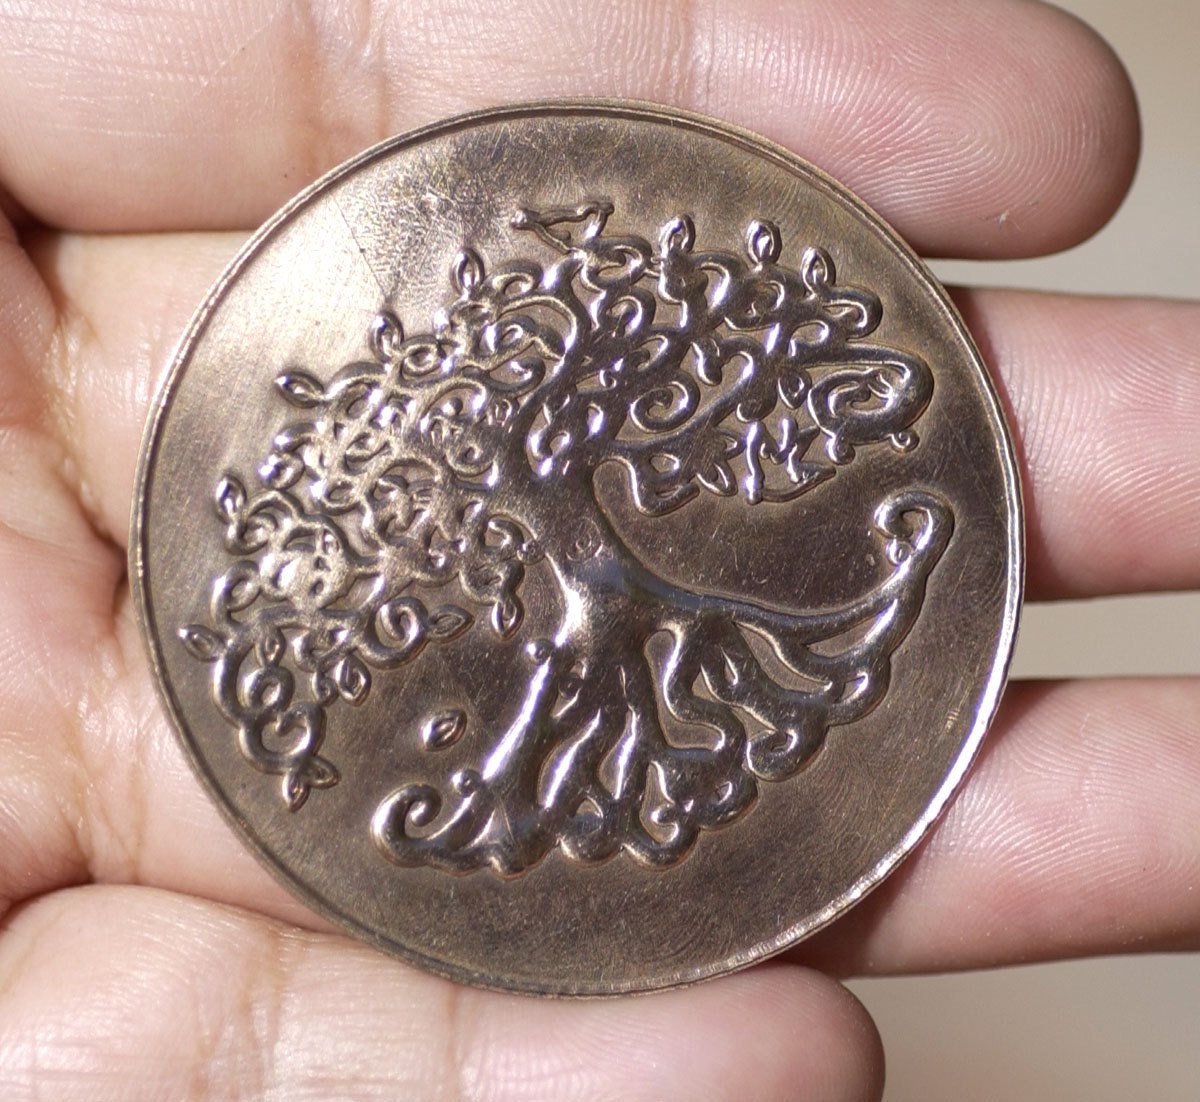 Tree of Life Disc Blank 42mm Enameling Soldering Stamping Pendant Blank, Supplies - 2 Pieces